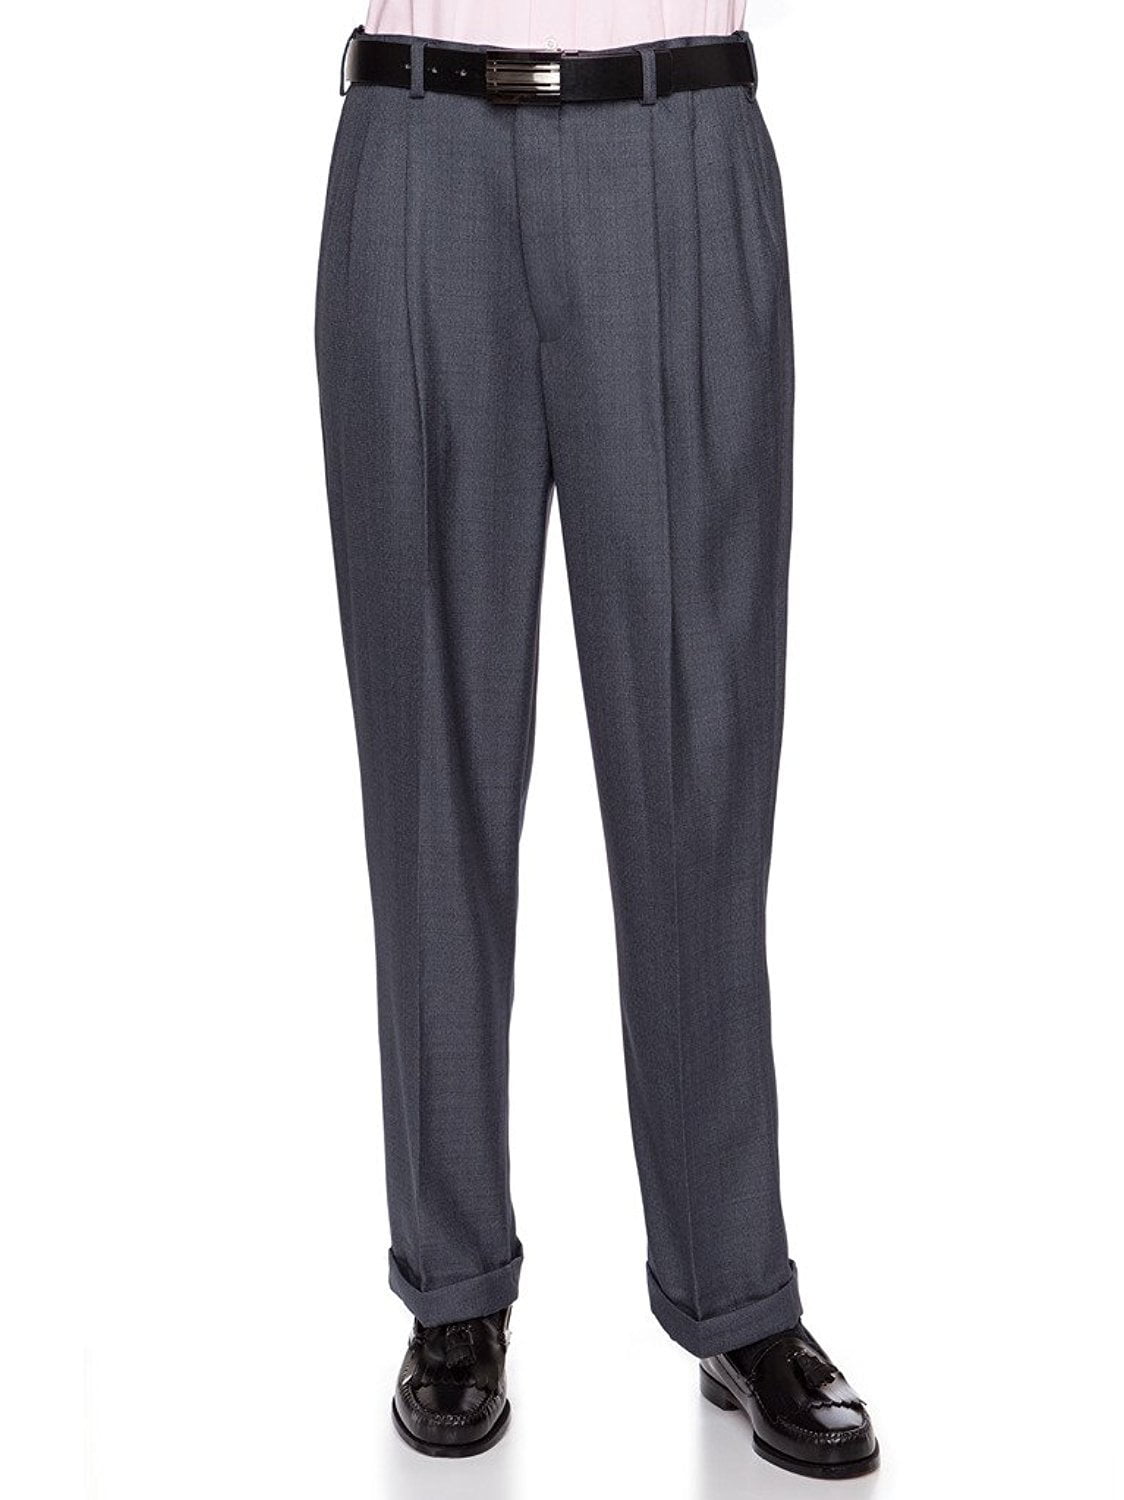 Velasca | Dress pants in breathable wool, made in Italy